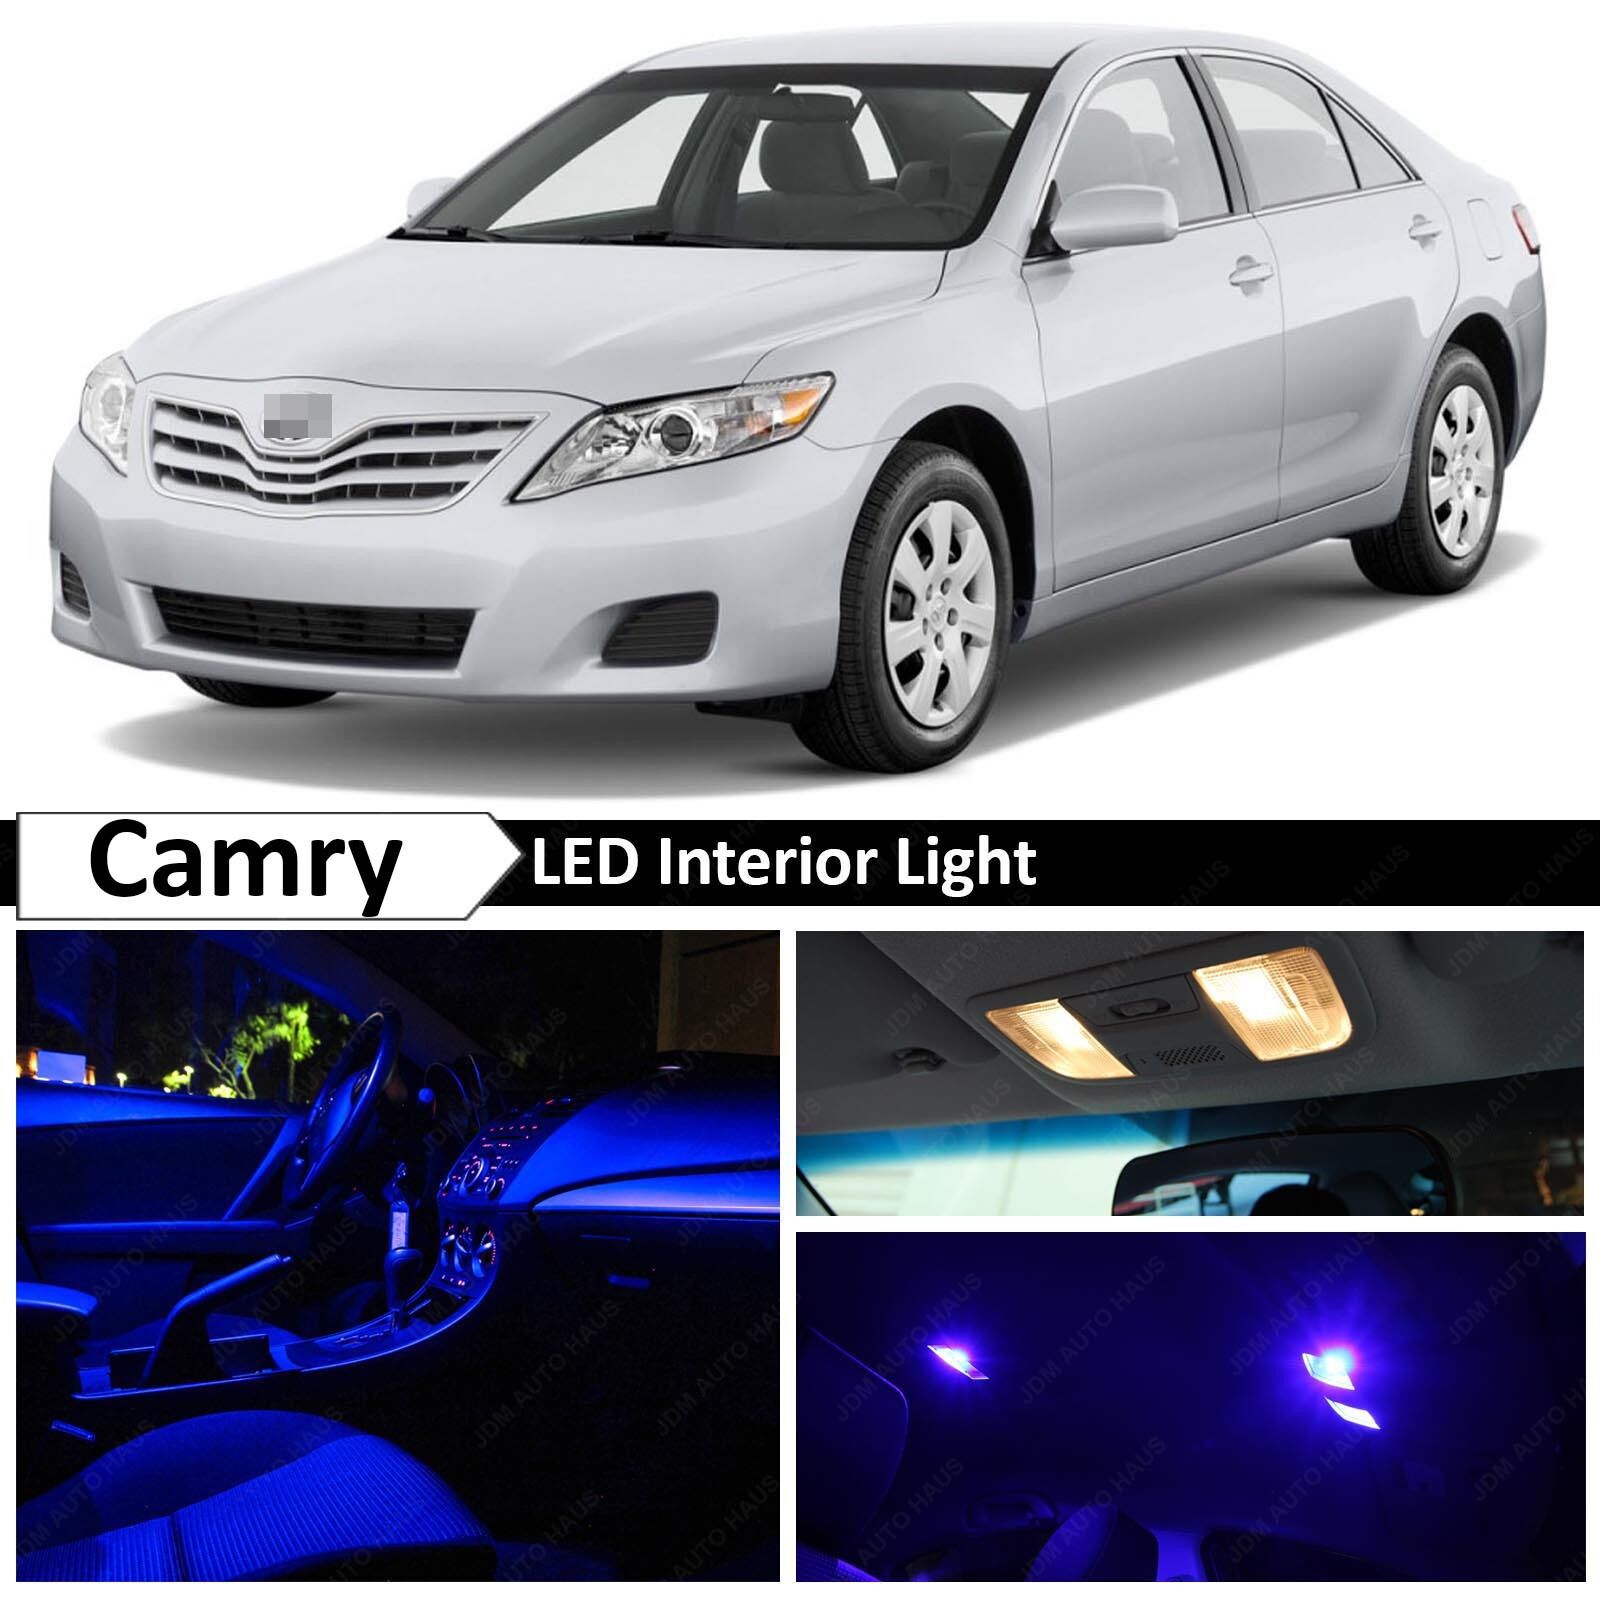 13x Blue LED Lights Interior Package Kit for 2007-2011 Toyota Camry